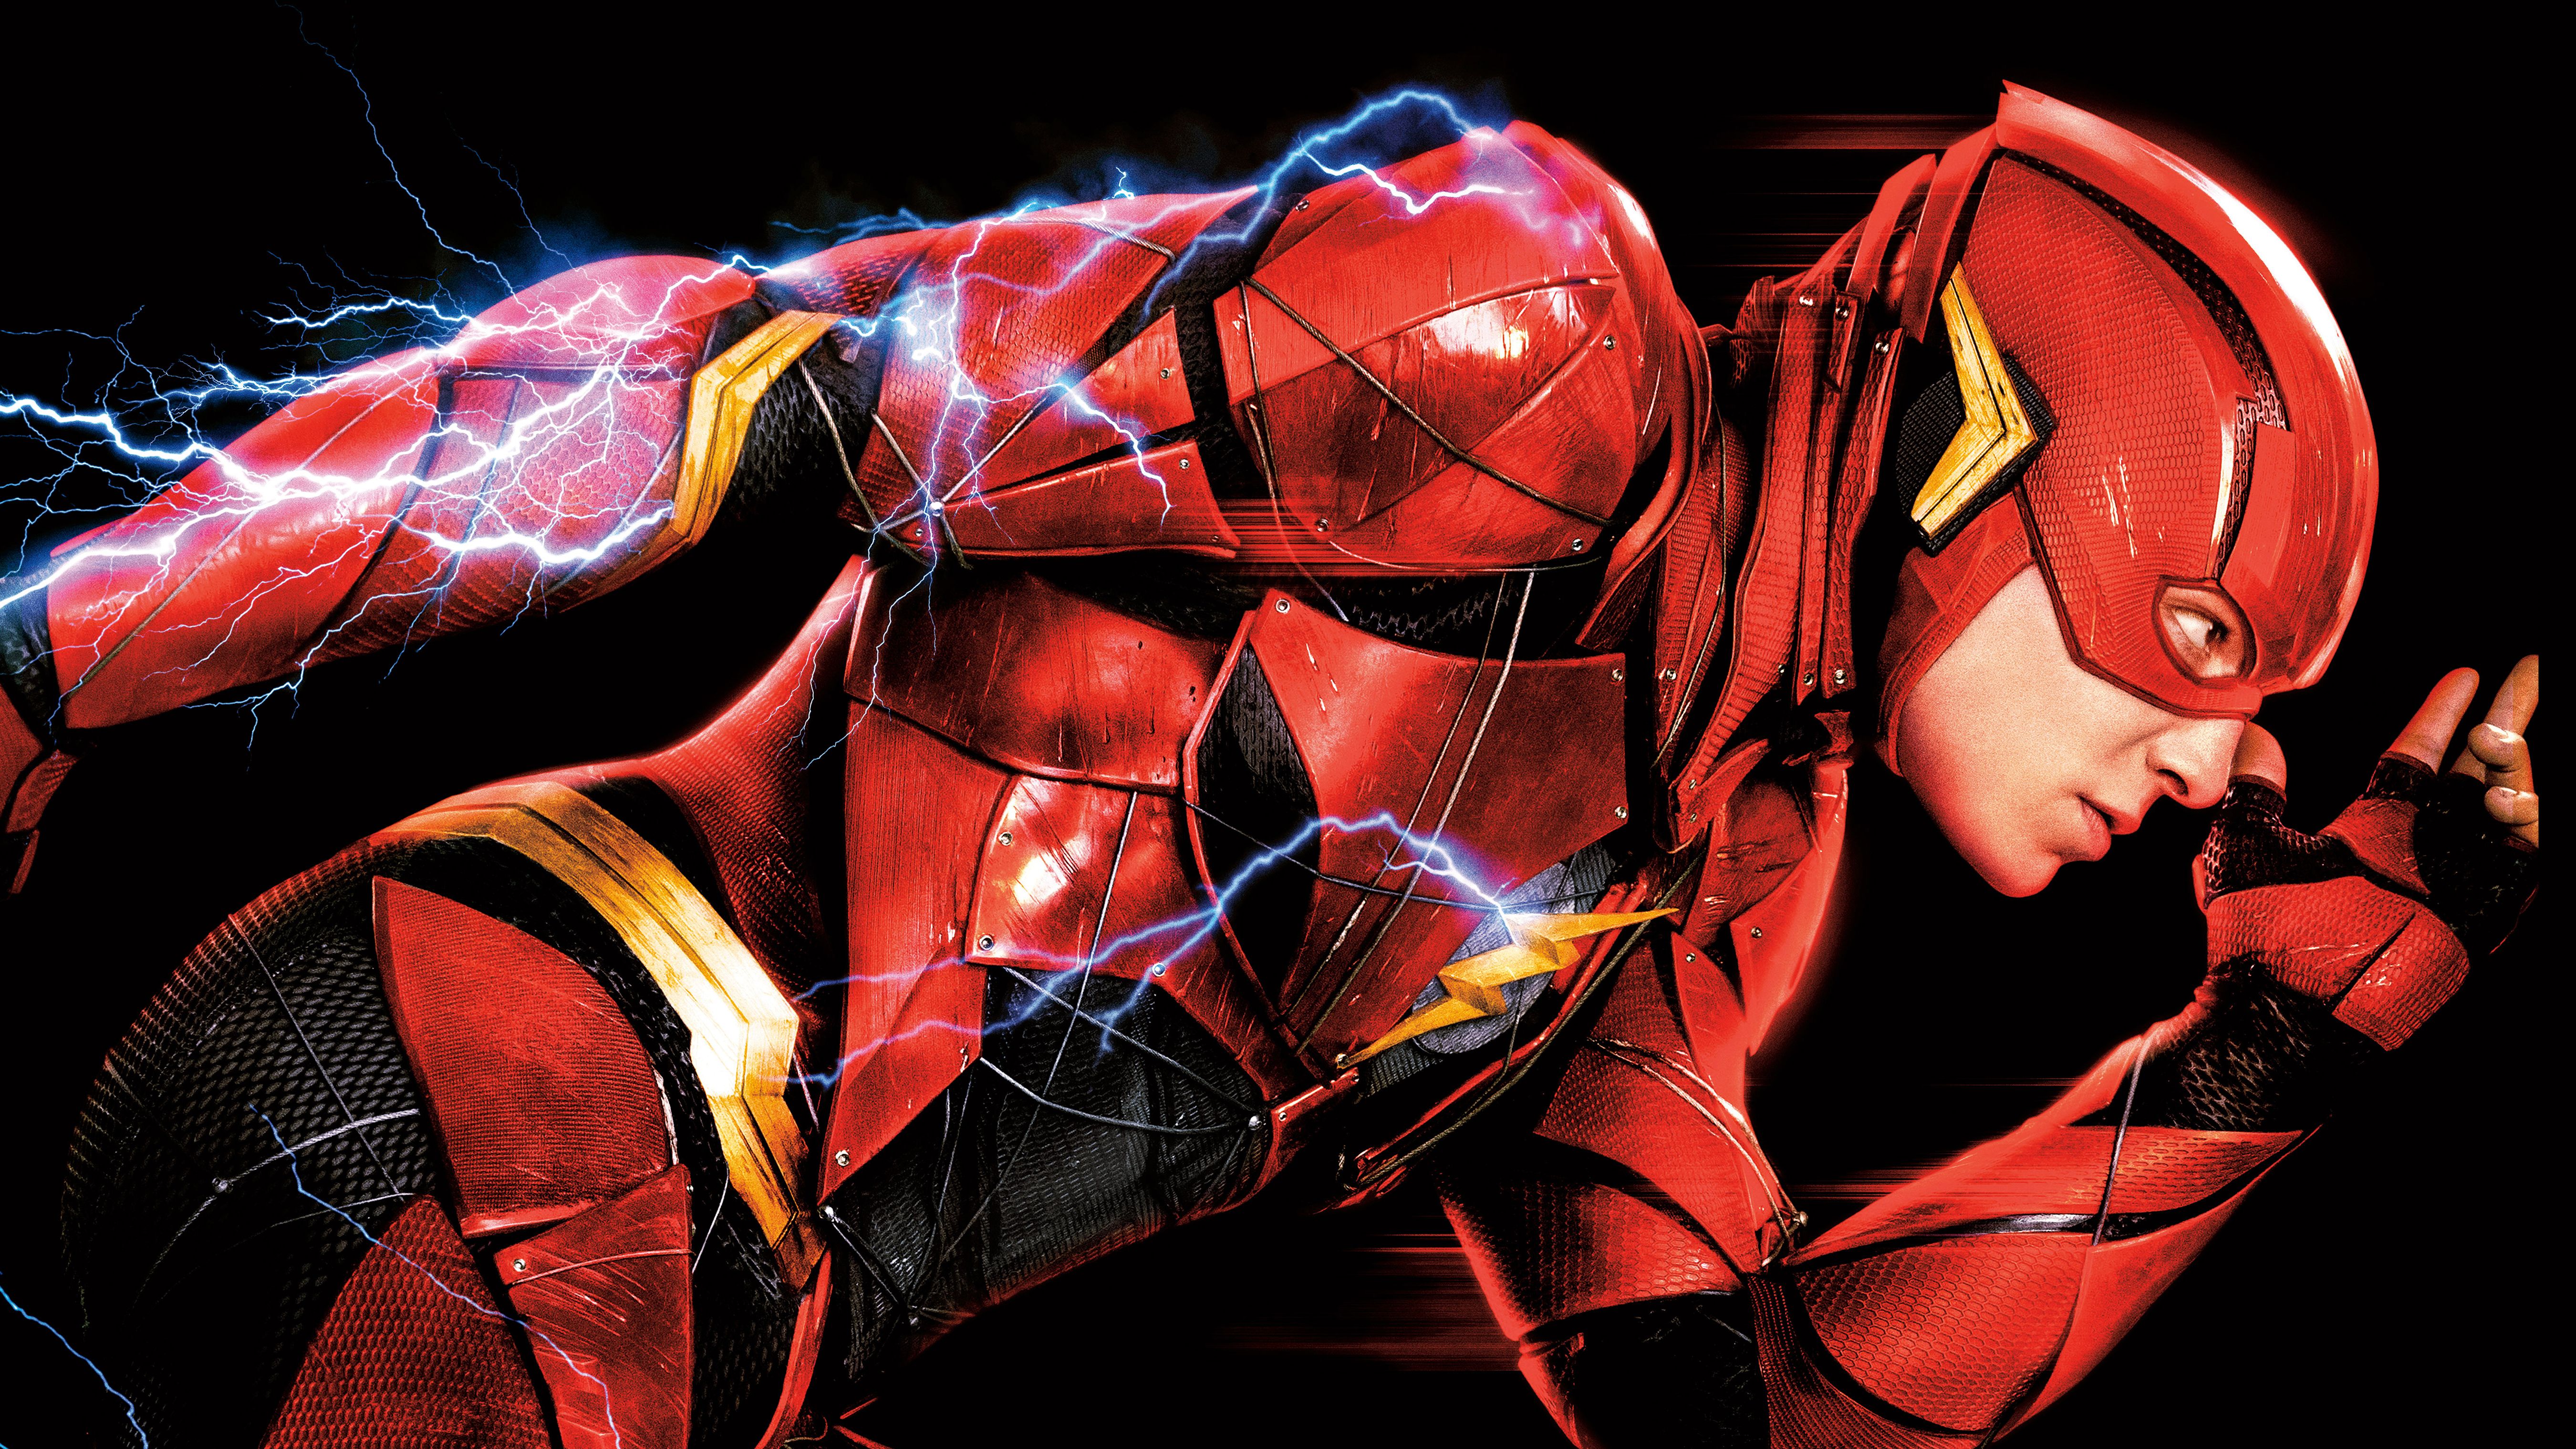 Wallpaper The Flash, Justice League, Ezra Miller, HD, 4K, Movies,. Wallpaper for iPhone, Android, Mobile and Desktop